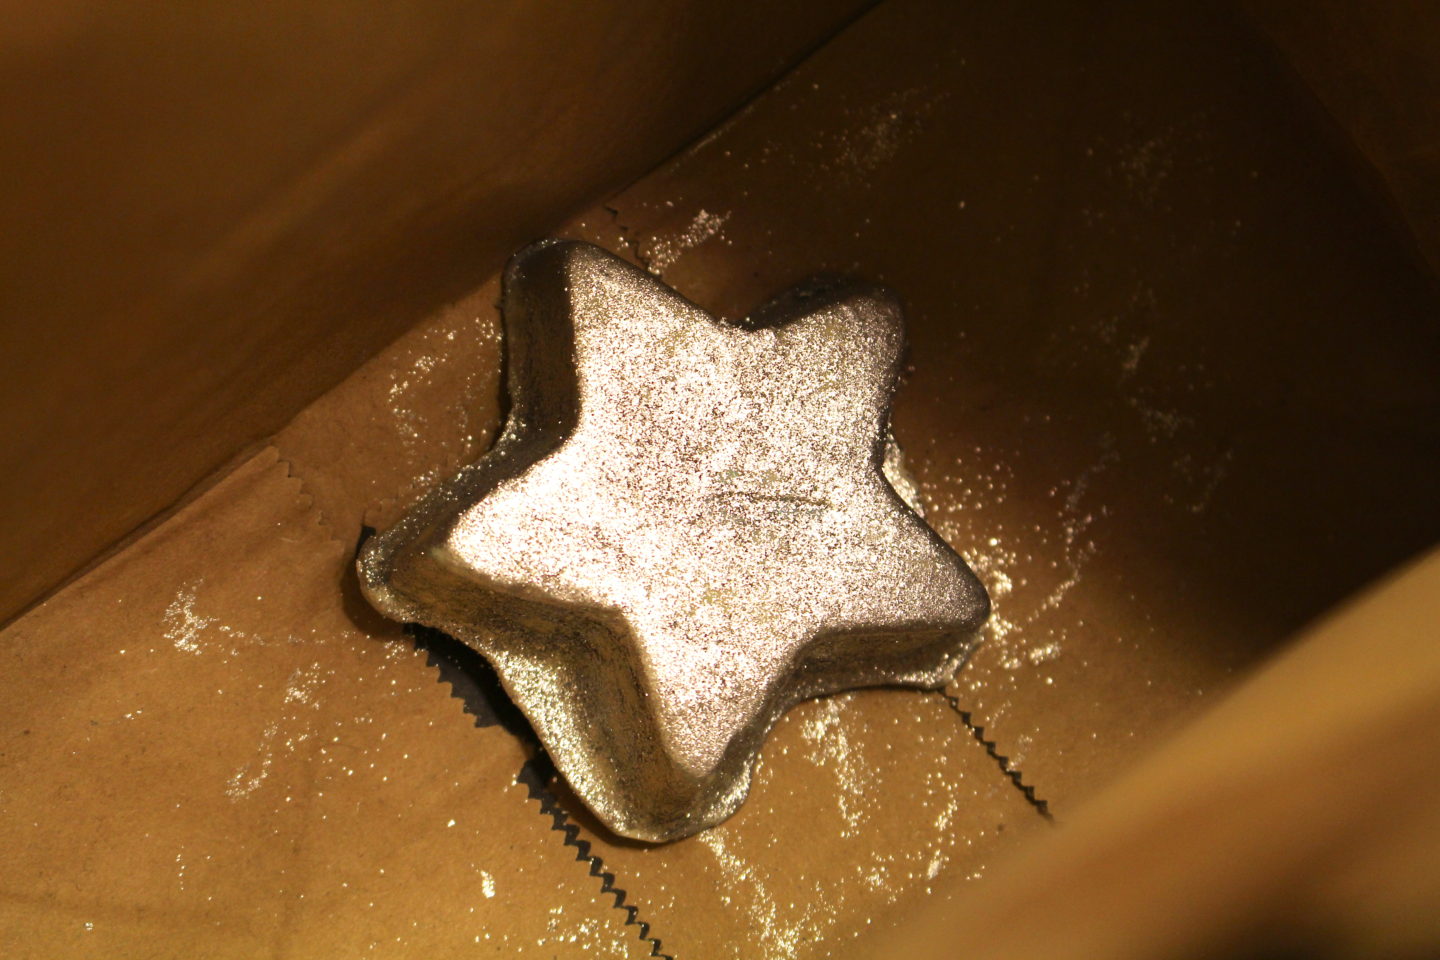 Product Review: Shining Star Bath Bomb by Lush